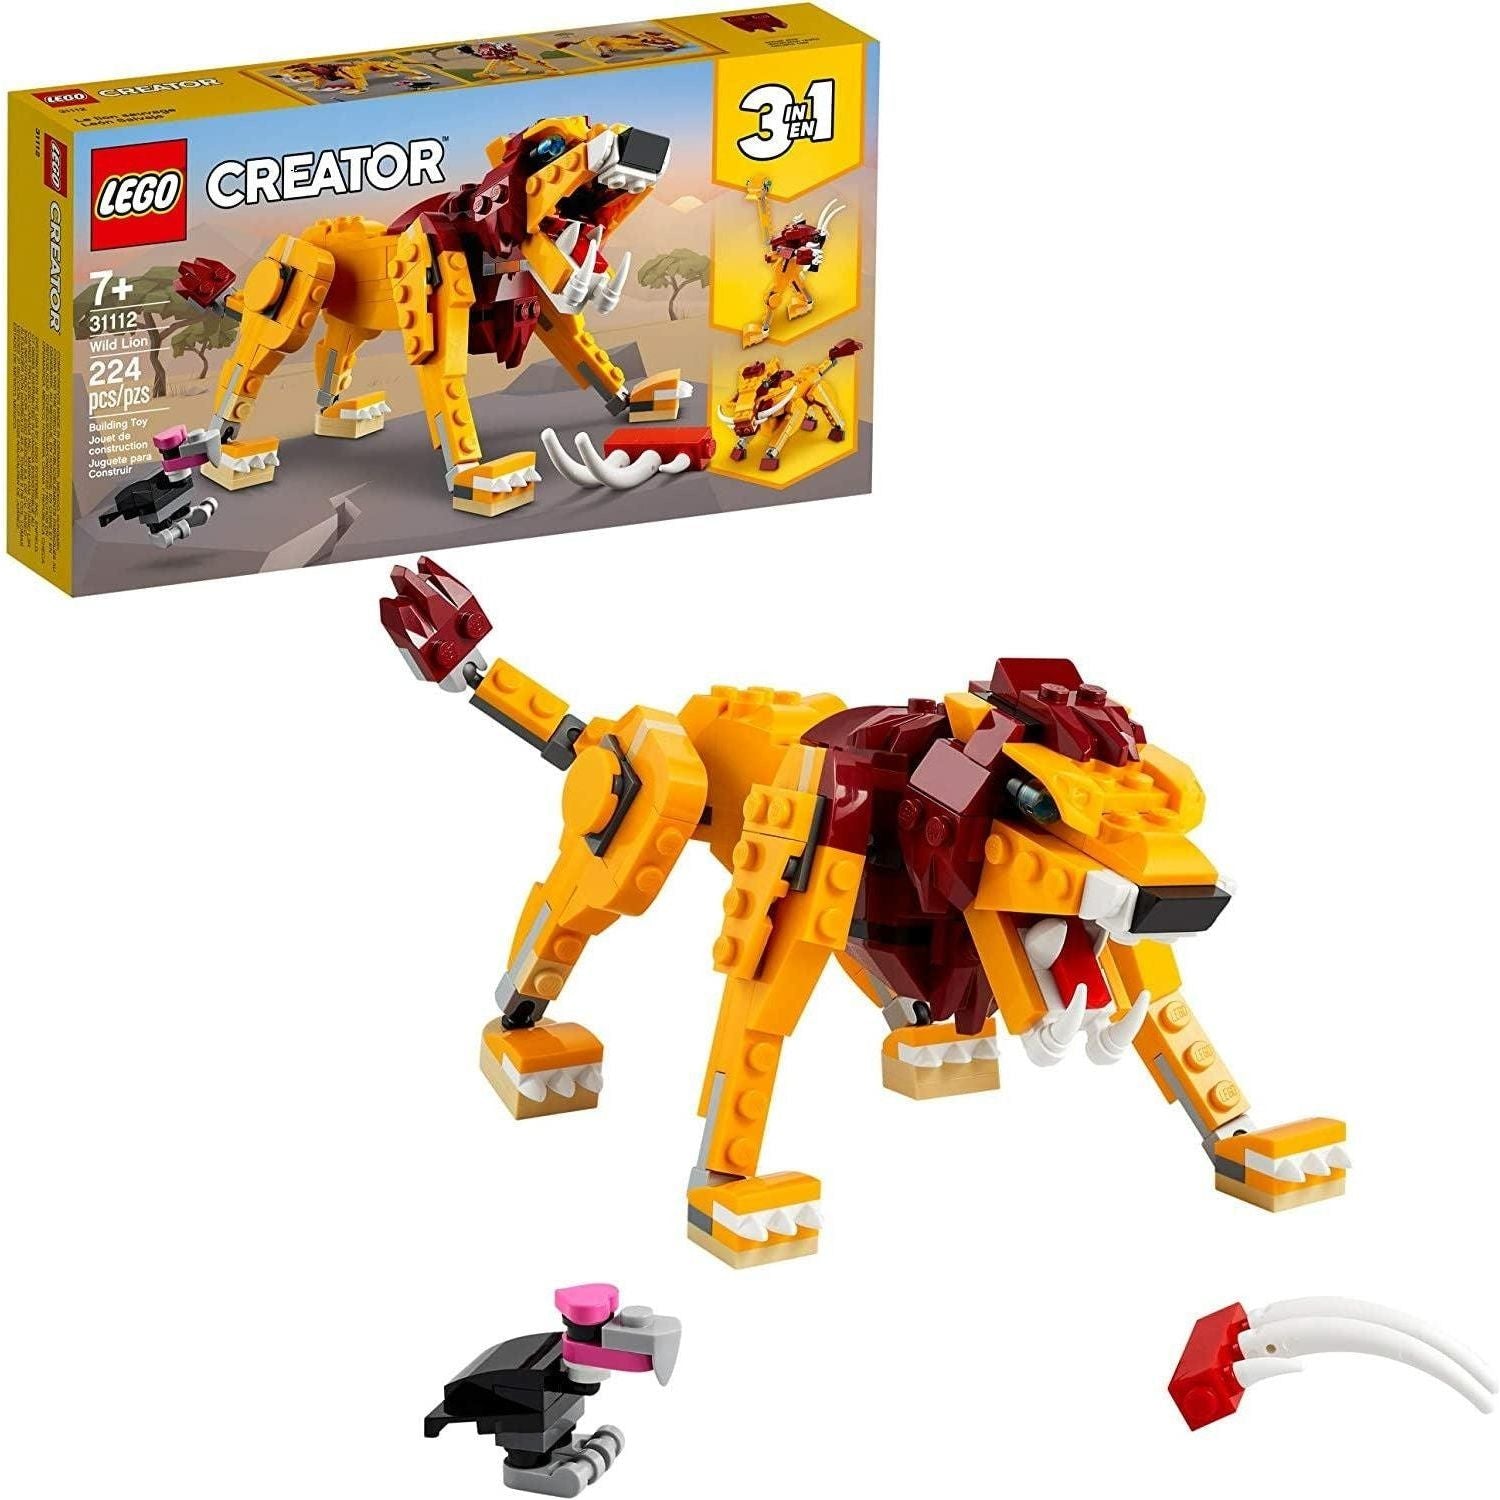 LEGO Creator 3in1 Wild Lion 31112 3in1 Toy Building Kit Featuring Animal Toys (224 Pieces) - BumbleToys - 8-13 Years, Boys, Creator 3In1, LEGO, OXE